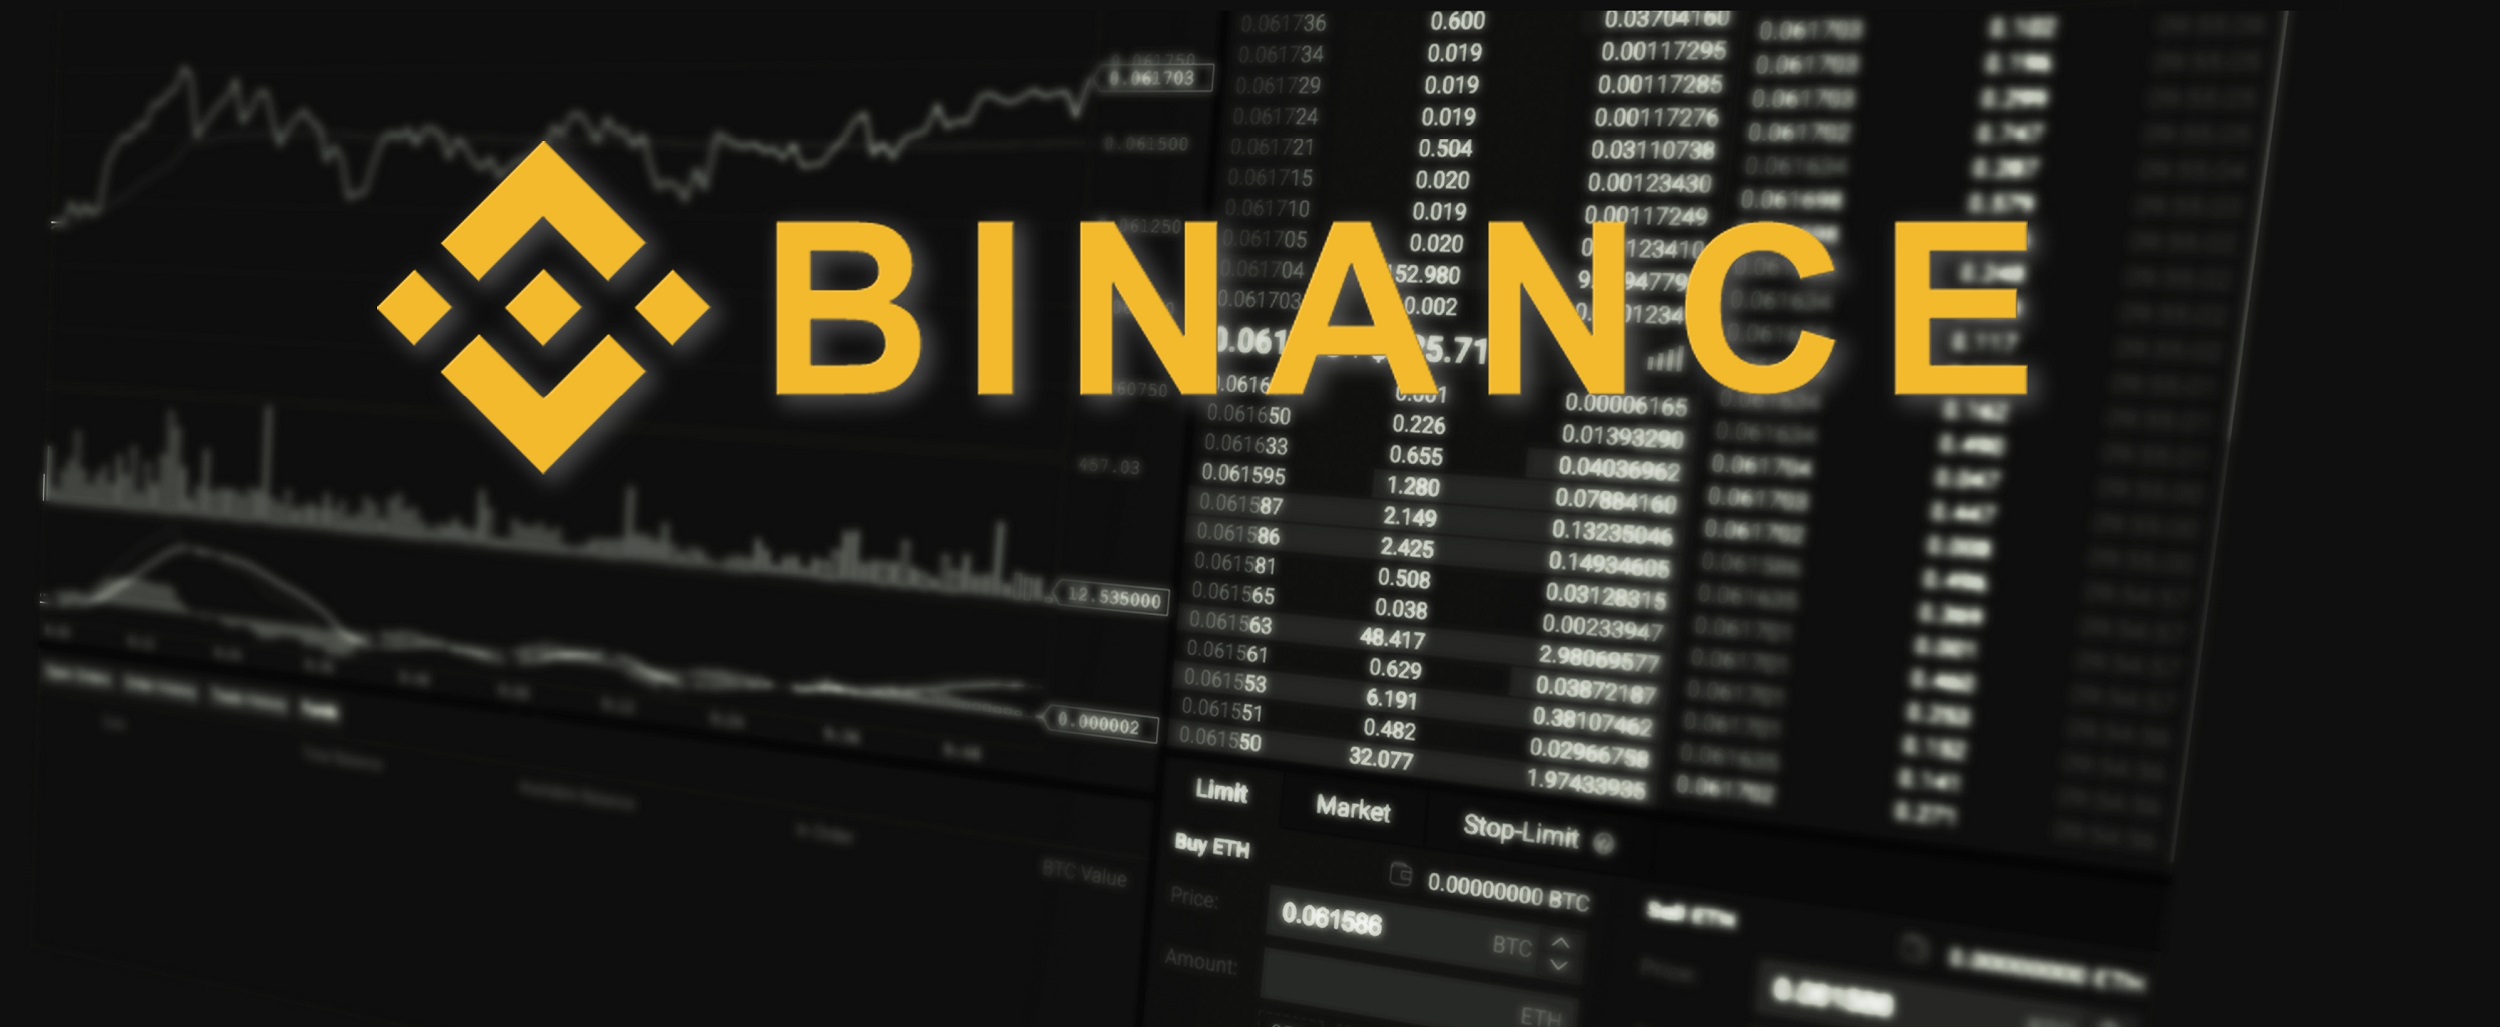  binance again coin price resistance surpasses without 